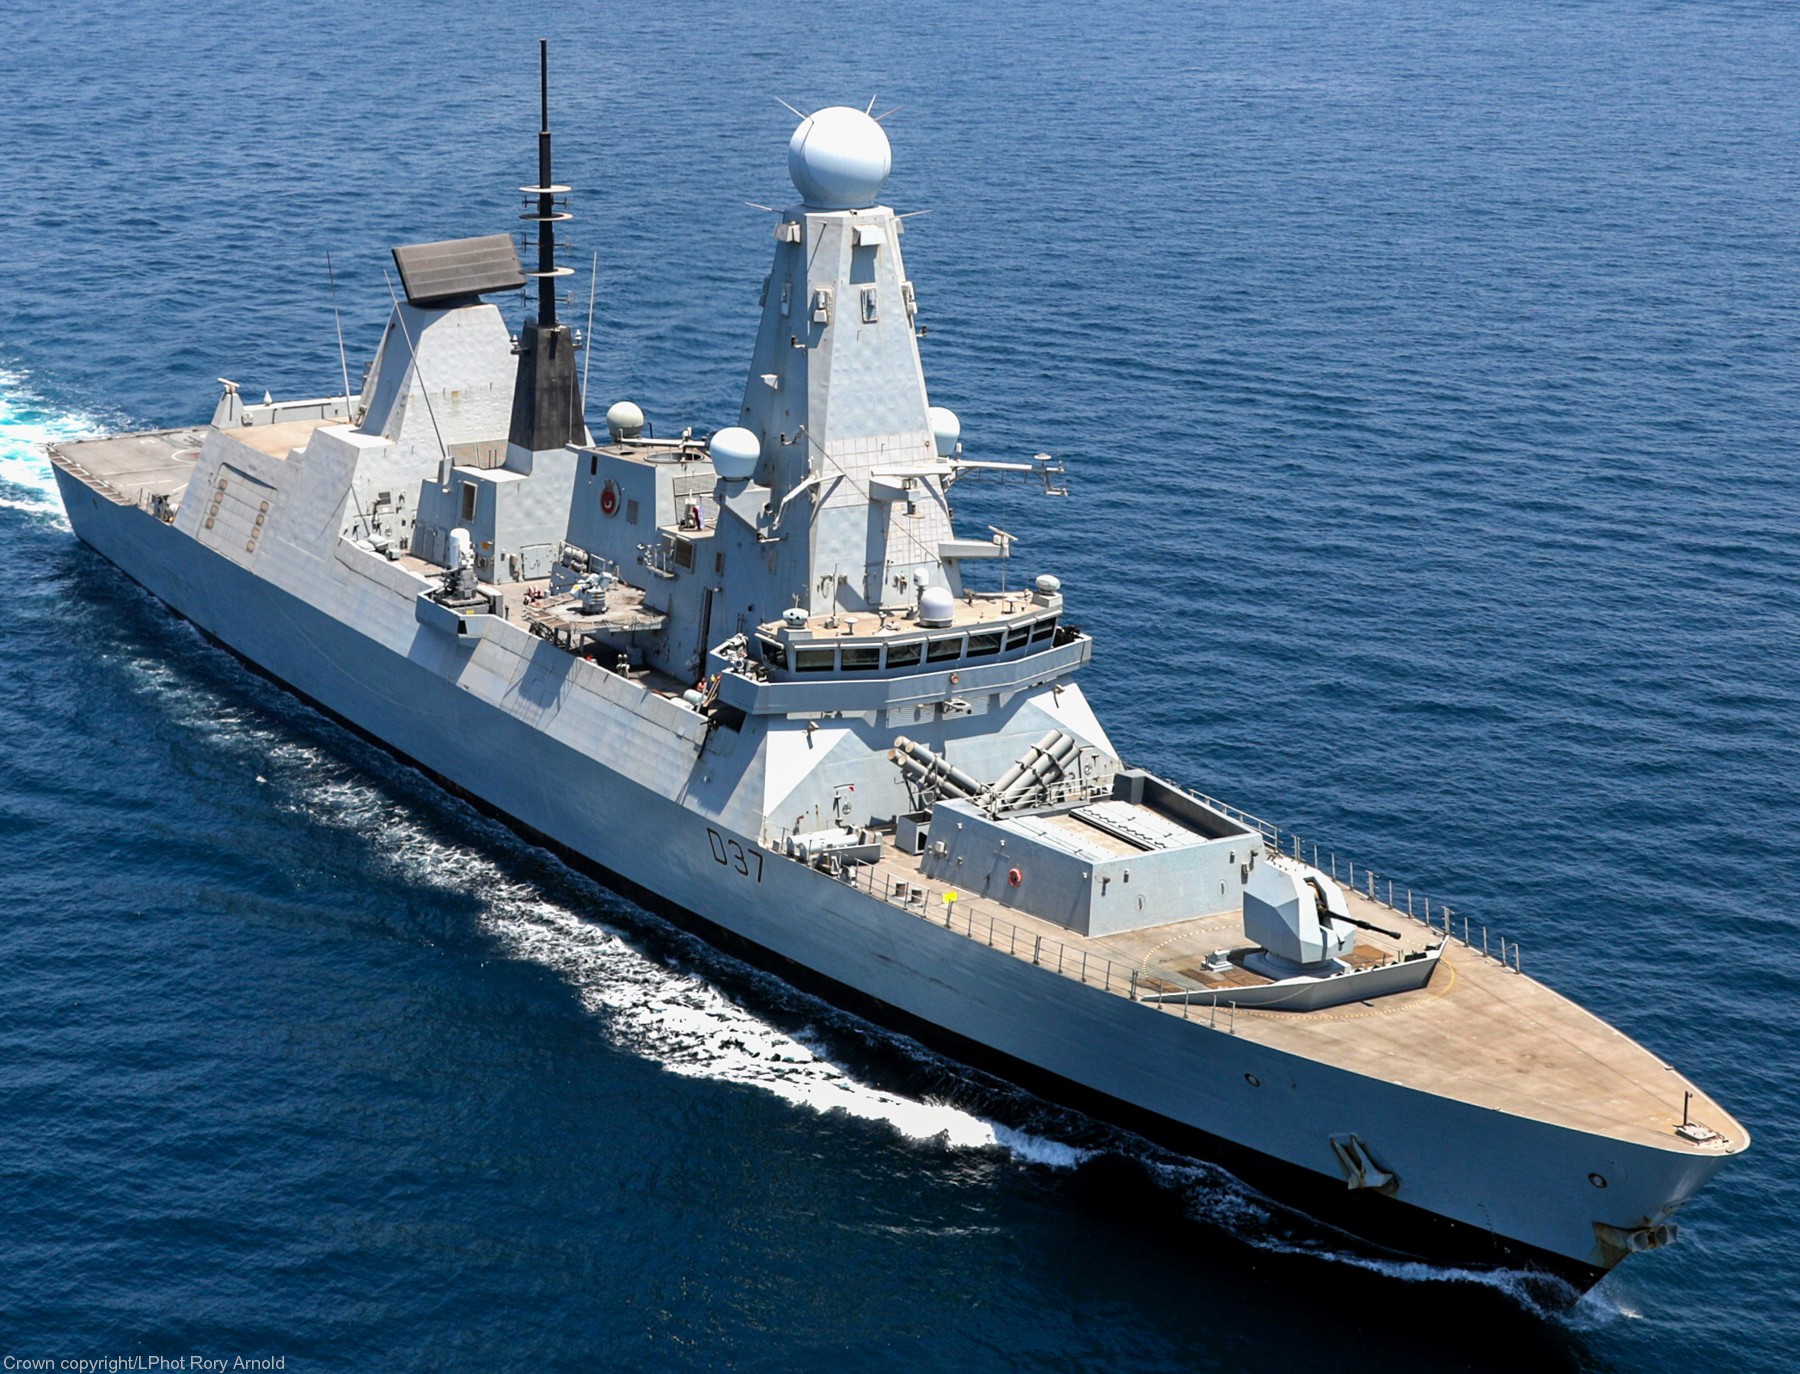 d37 hms duncan d-37 type 45 daring class guided missile destroyer ddg royal navy sea viper 18